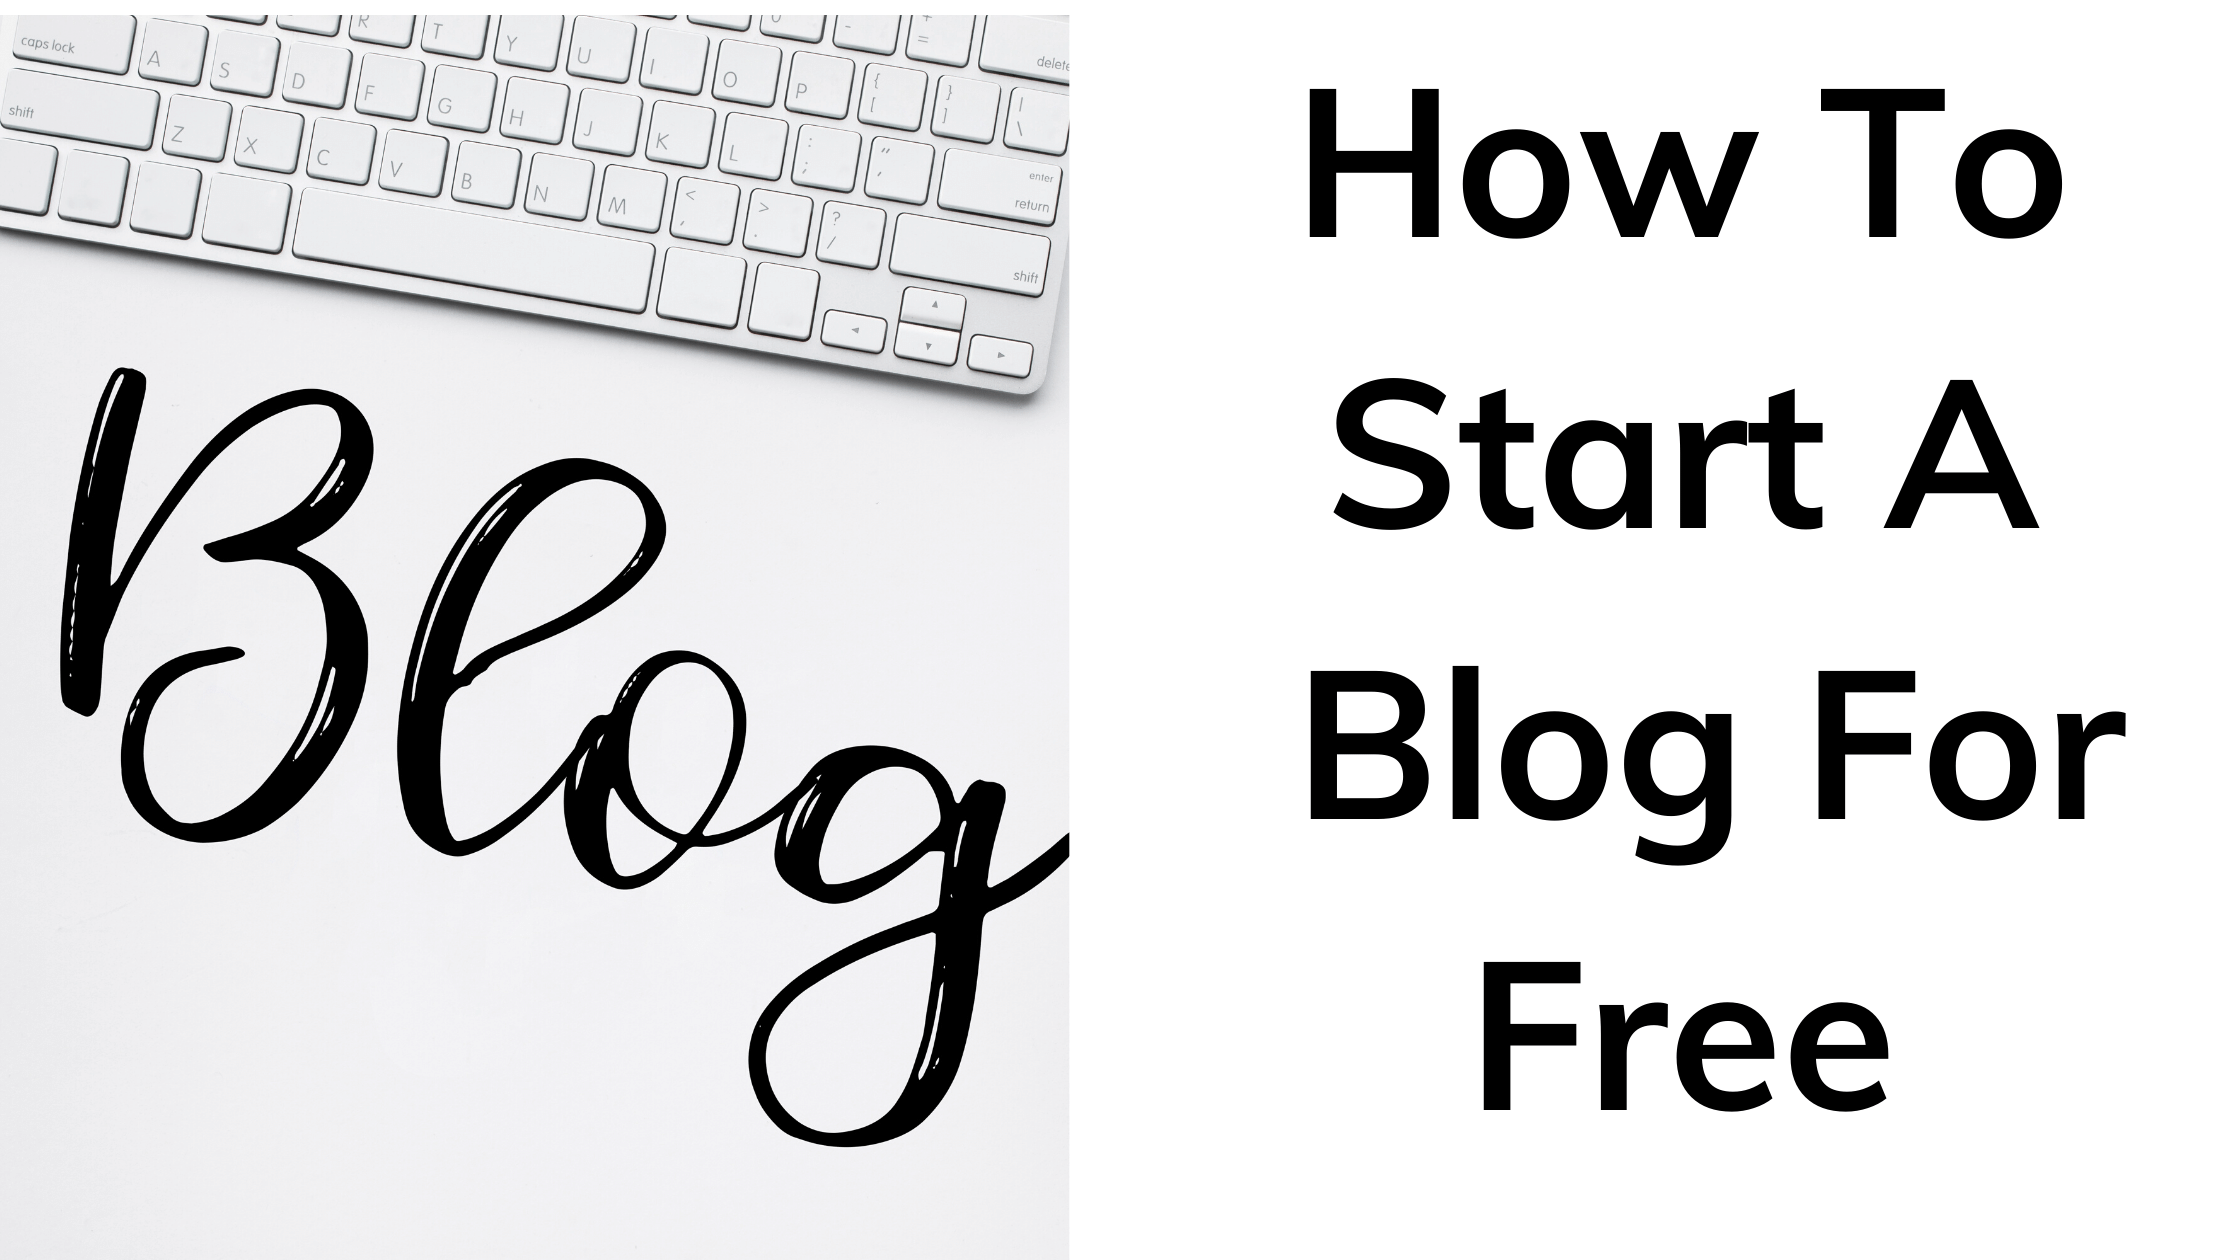 How to start a blog for free